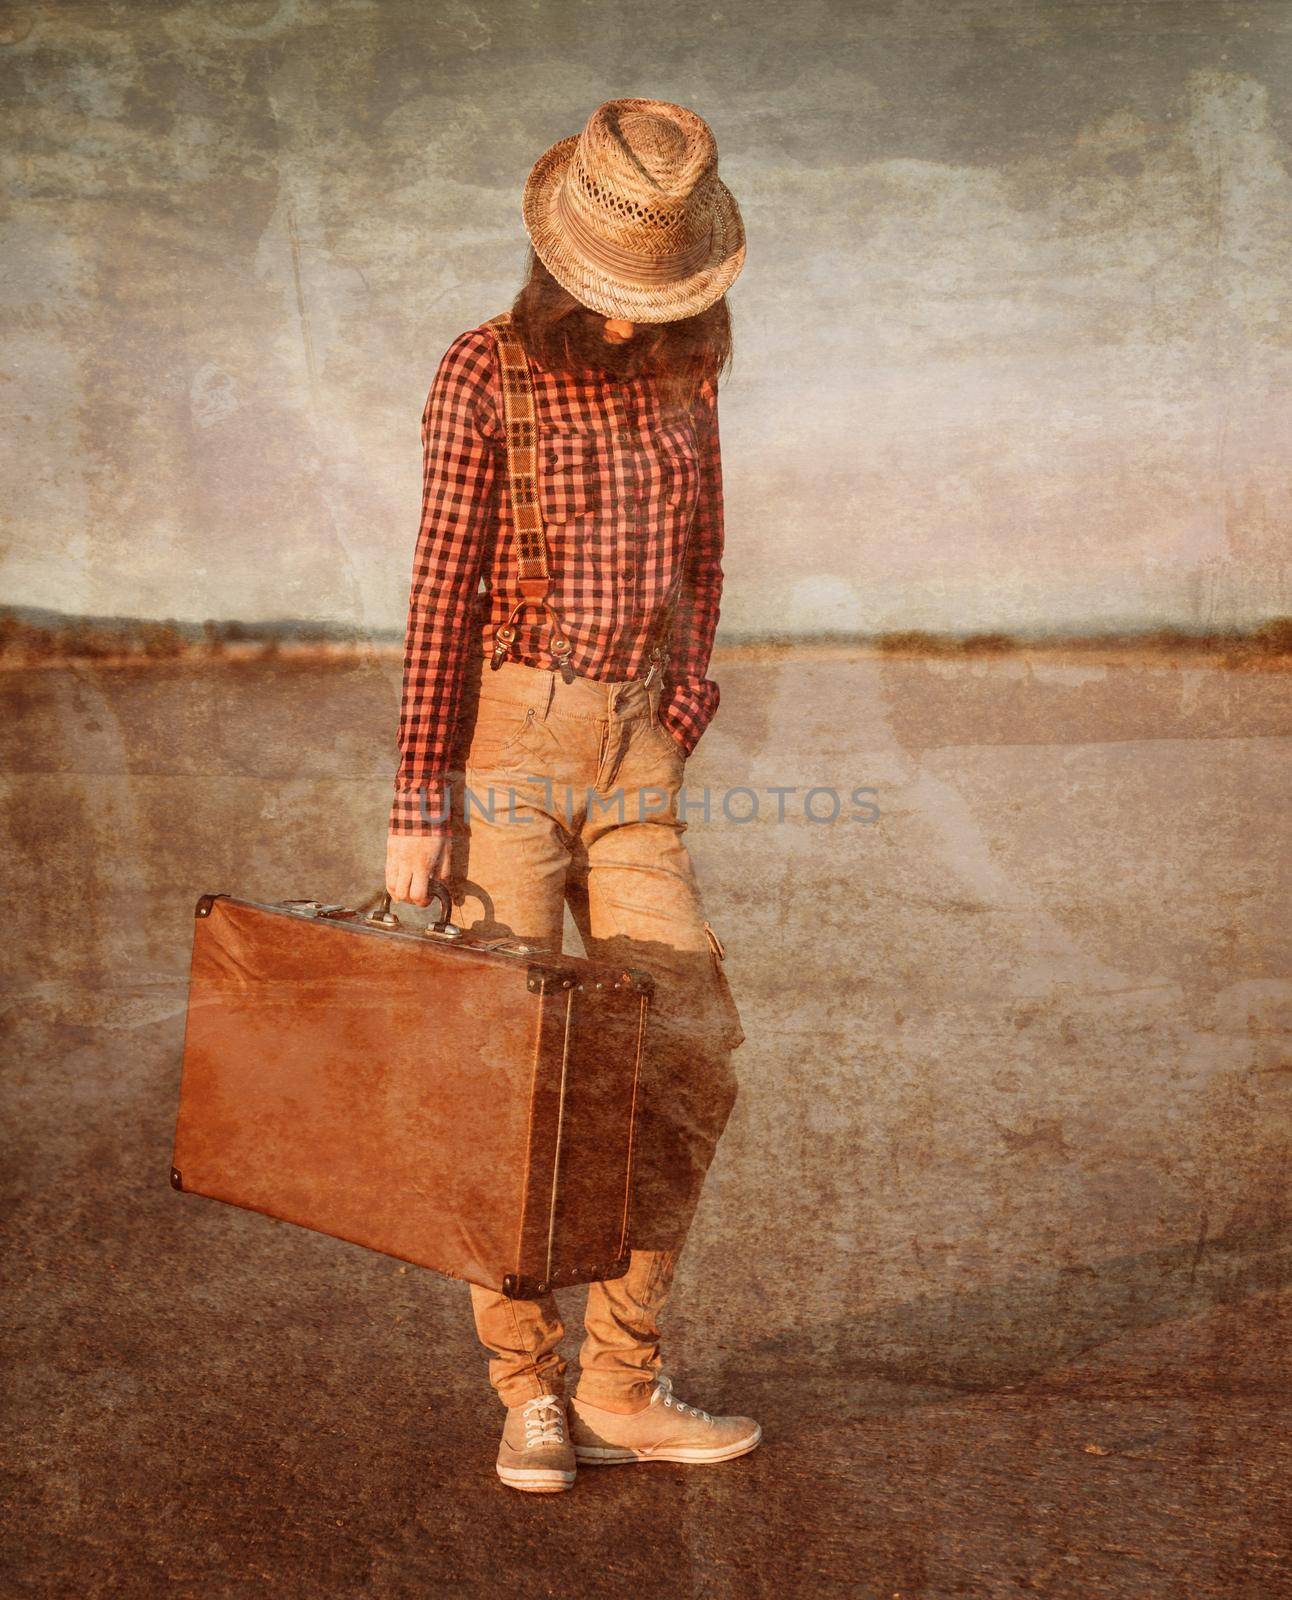 Hipster woman in hat stands with retro suitcase on road. Vintage image